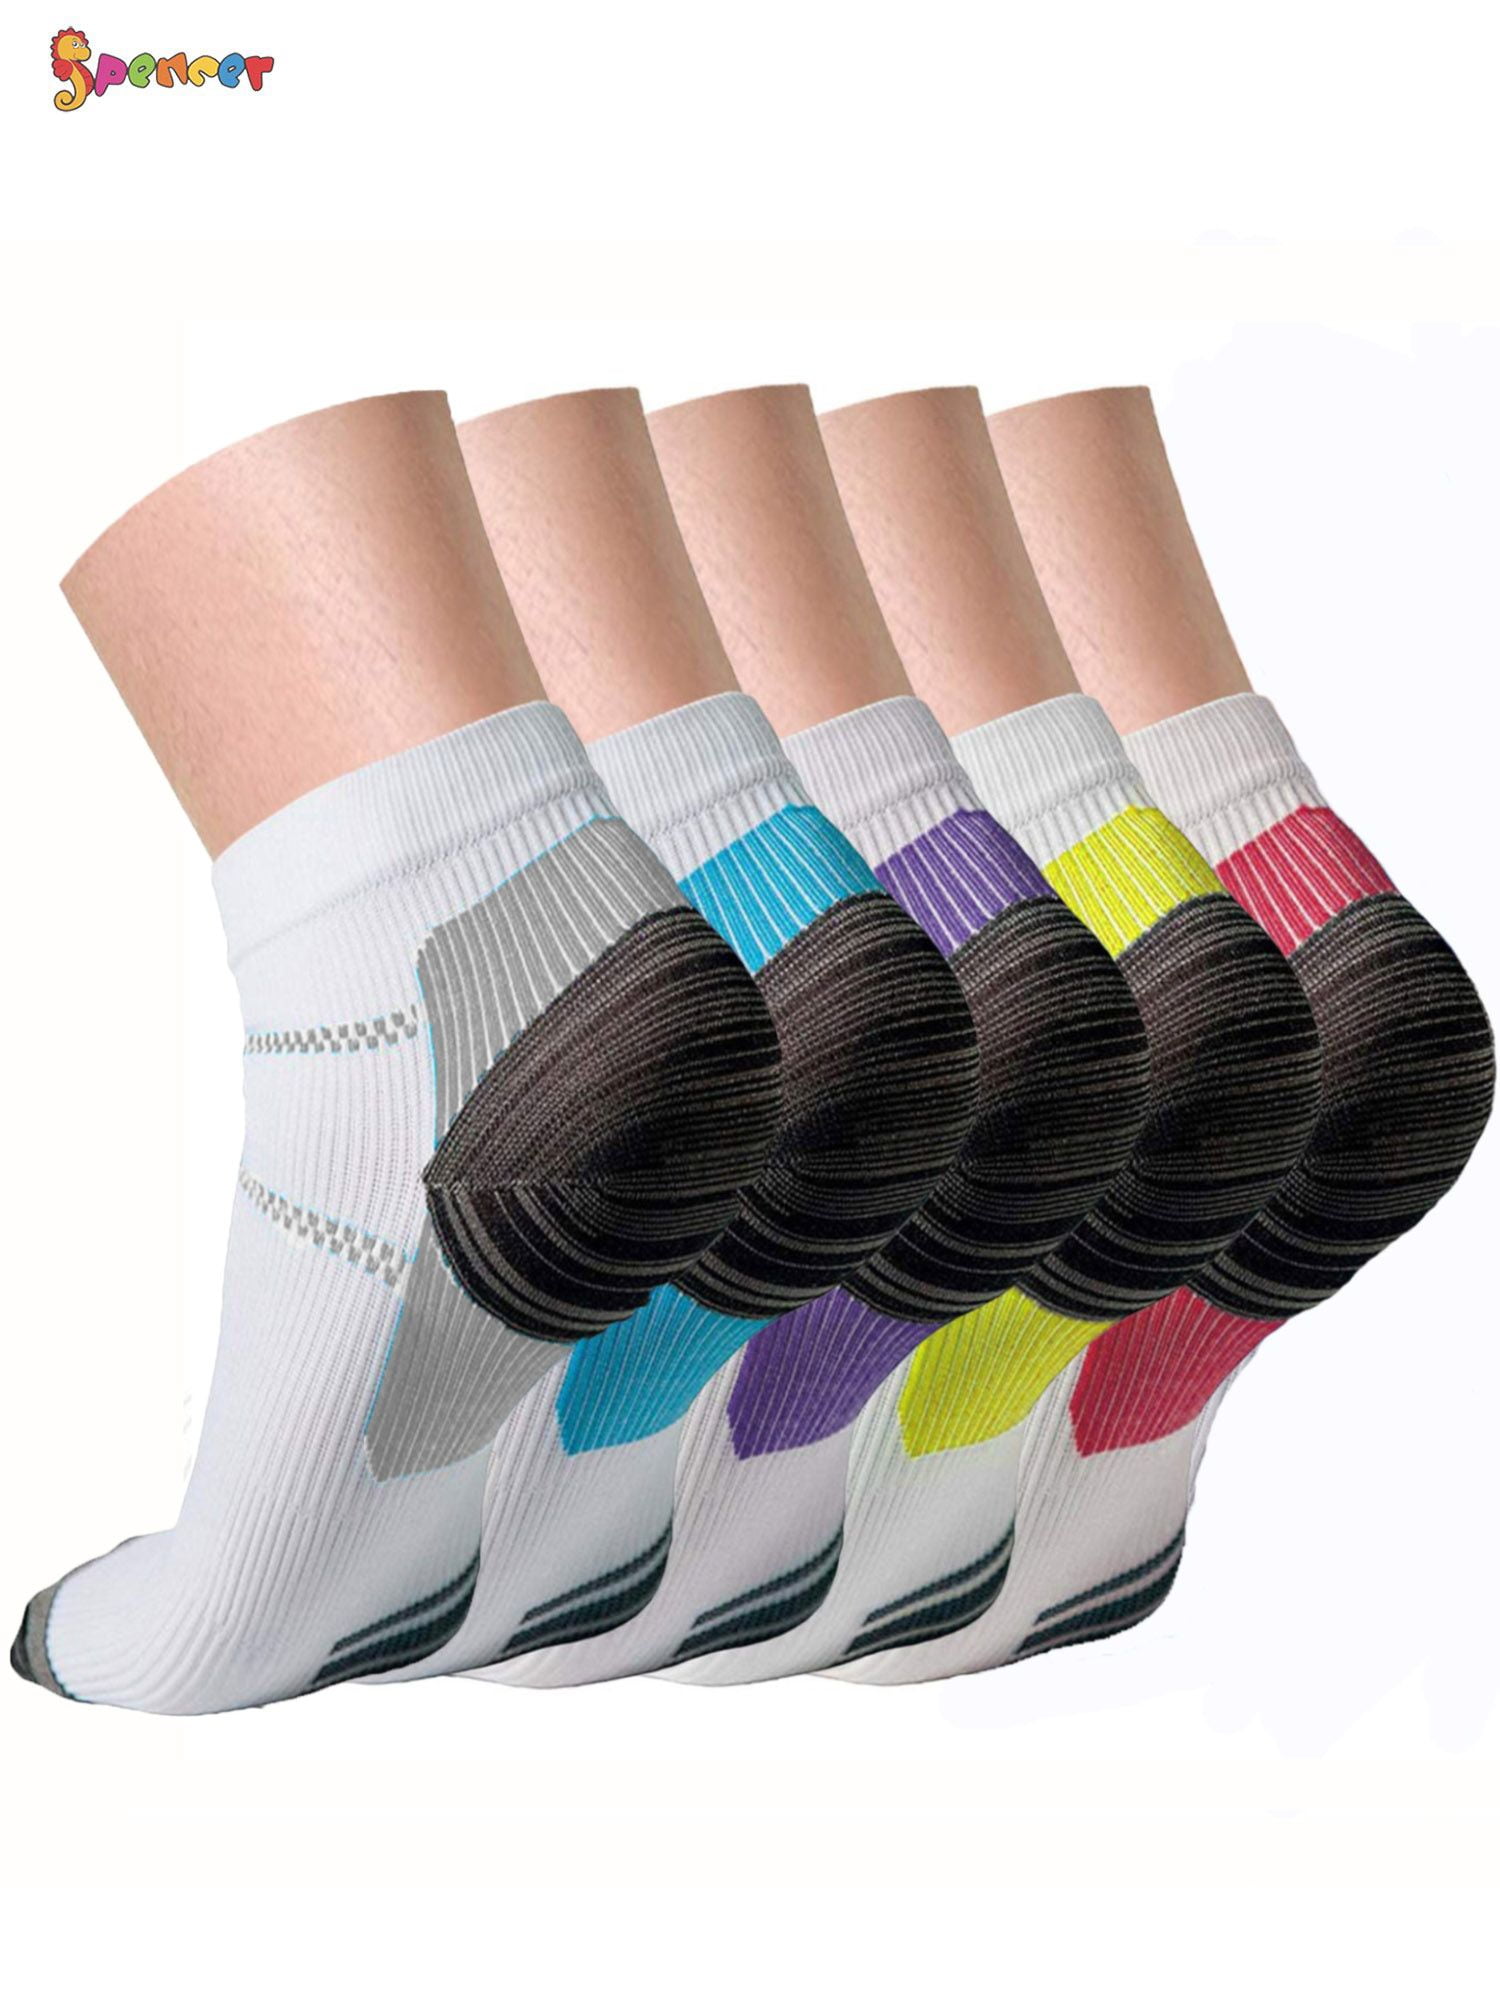 6 Pairs Compression Socks Plantar Fasciitis Heel Arch Pain Relief Support 